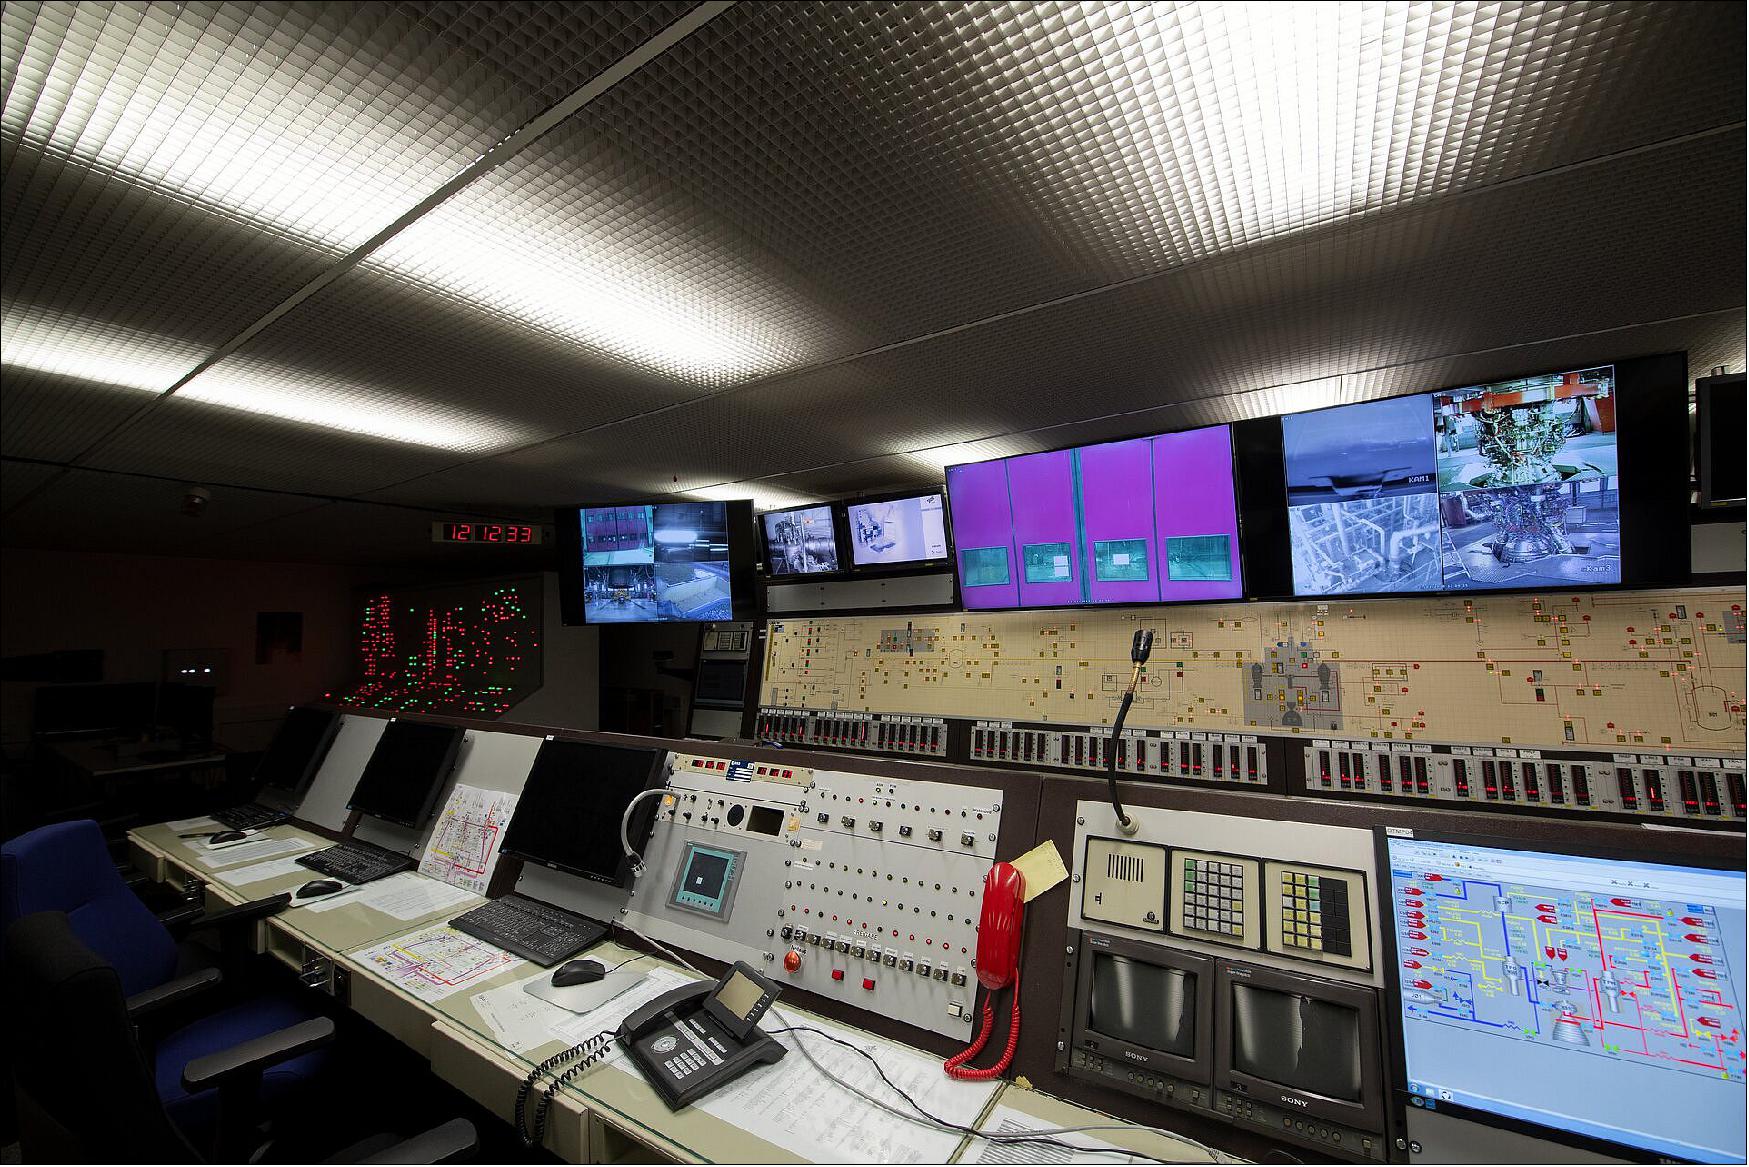 Figure 45: On 26 February 2019, the DLR German Aerospace Center in Lampoldshausen inaugurated a new test facility that simulates launch for the complete Ariane 6 upper stage. Operations inside the test stand are monitored from a central control room located away from the test stand. After final preparations, a countdown marks the start of the test, simulating an actual rocket launch. The tests will include the Vinci engine firing, non-propulsive ballistic phases, tank pressurization to increase performance, Vinci re-ignitions, exhaust nozzle maneuvers, ending with passivation where all remaining internal energy is removed (image credit: ESA, S. Corvaya)